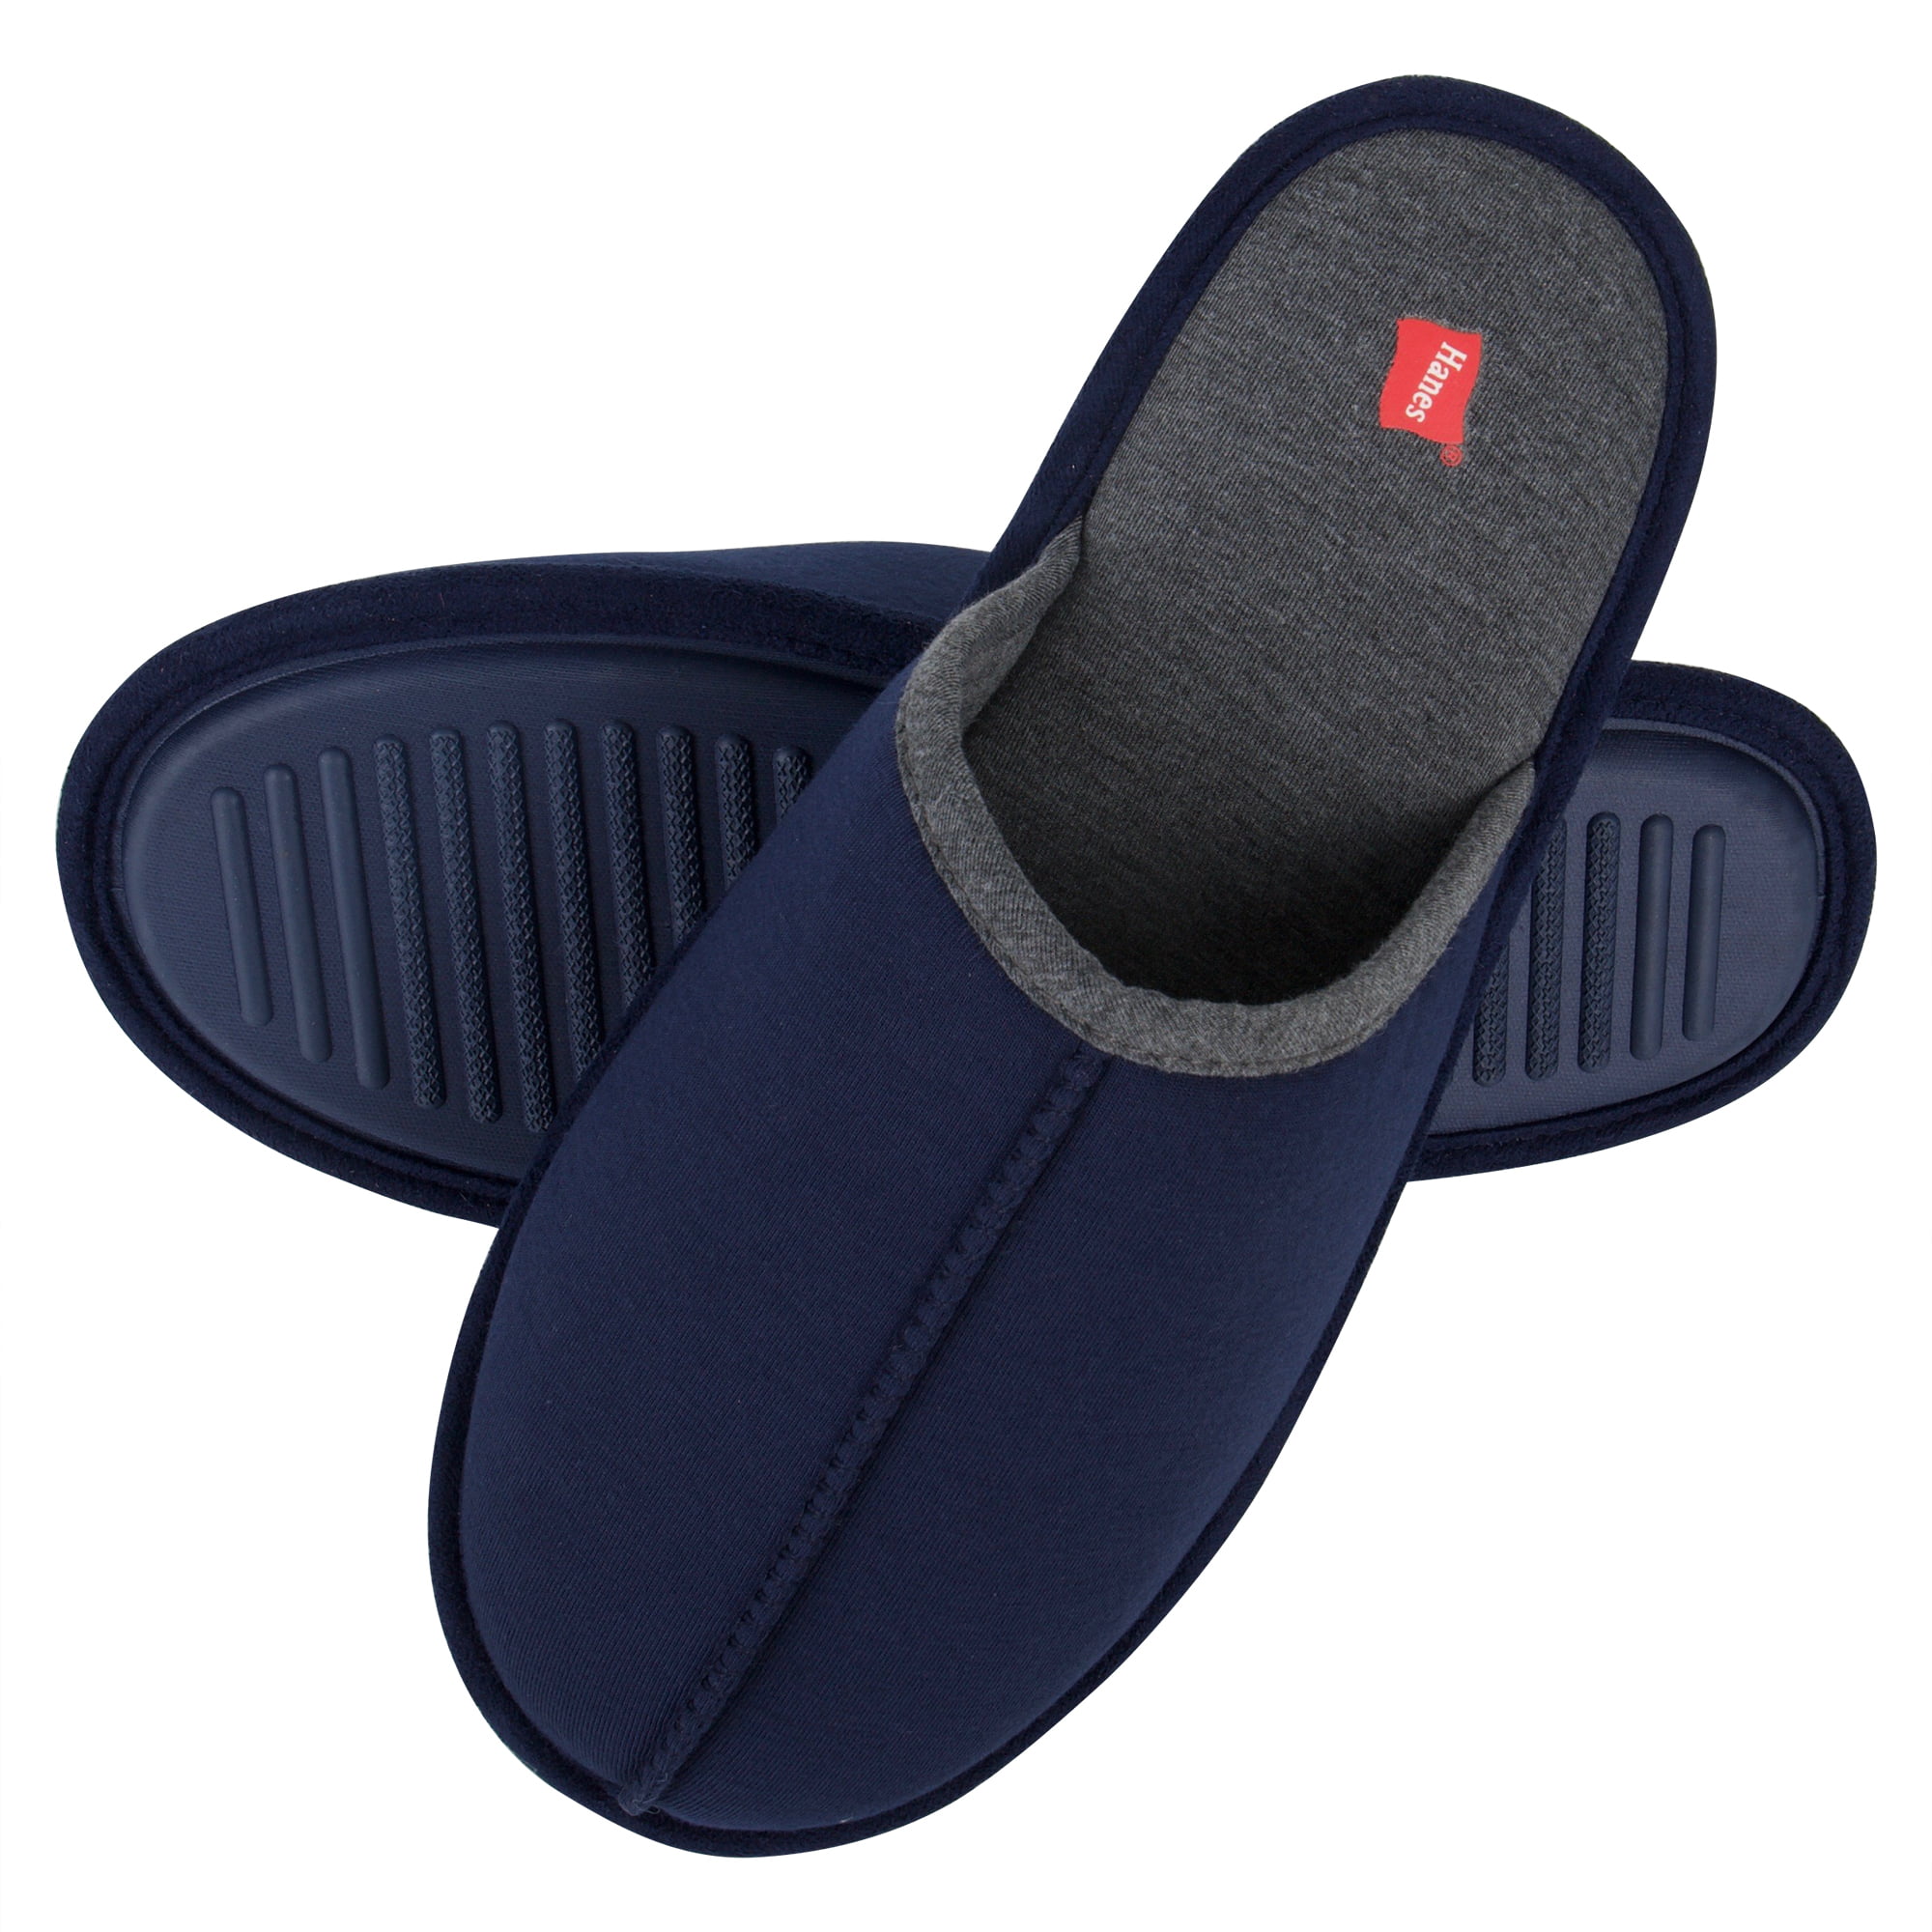 Navy or Red Velour Slippers Zedzzz Men's Black Big Sizes Available 12 13 14 